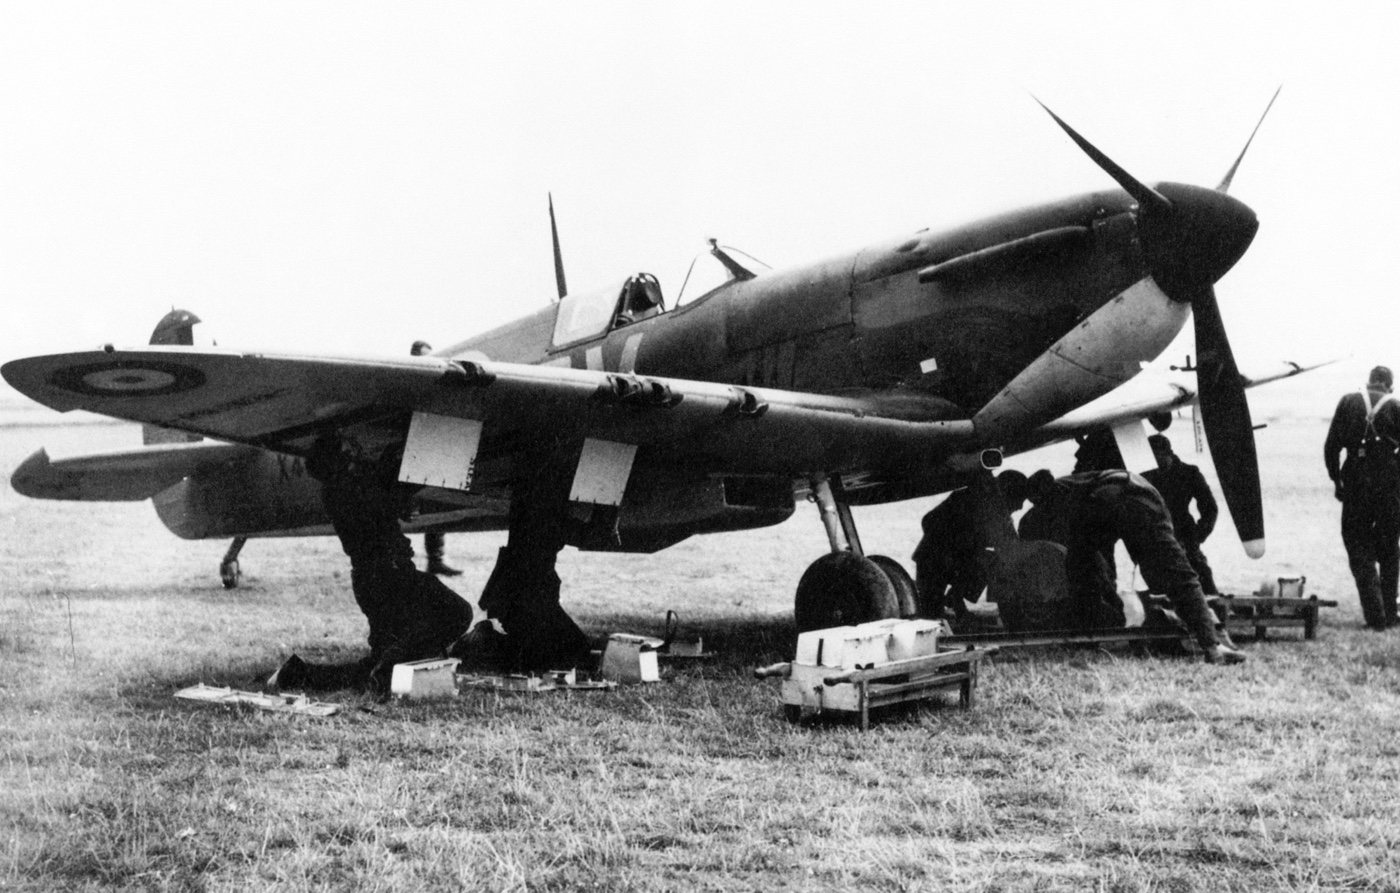 In this early photograph from World War II, ground crews rush to rearm a Supermarine Spitfire Mk I so it can intercept German bombers over England.